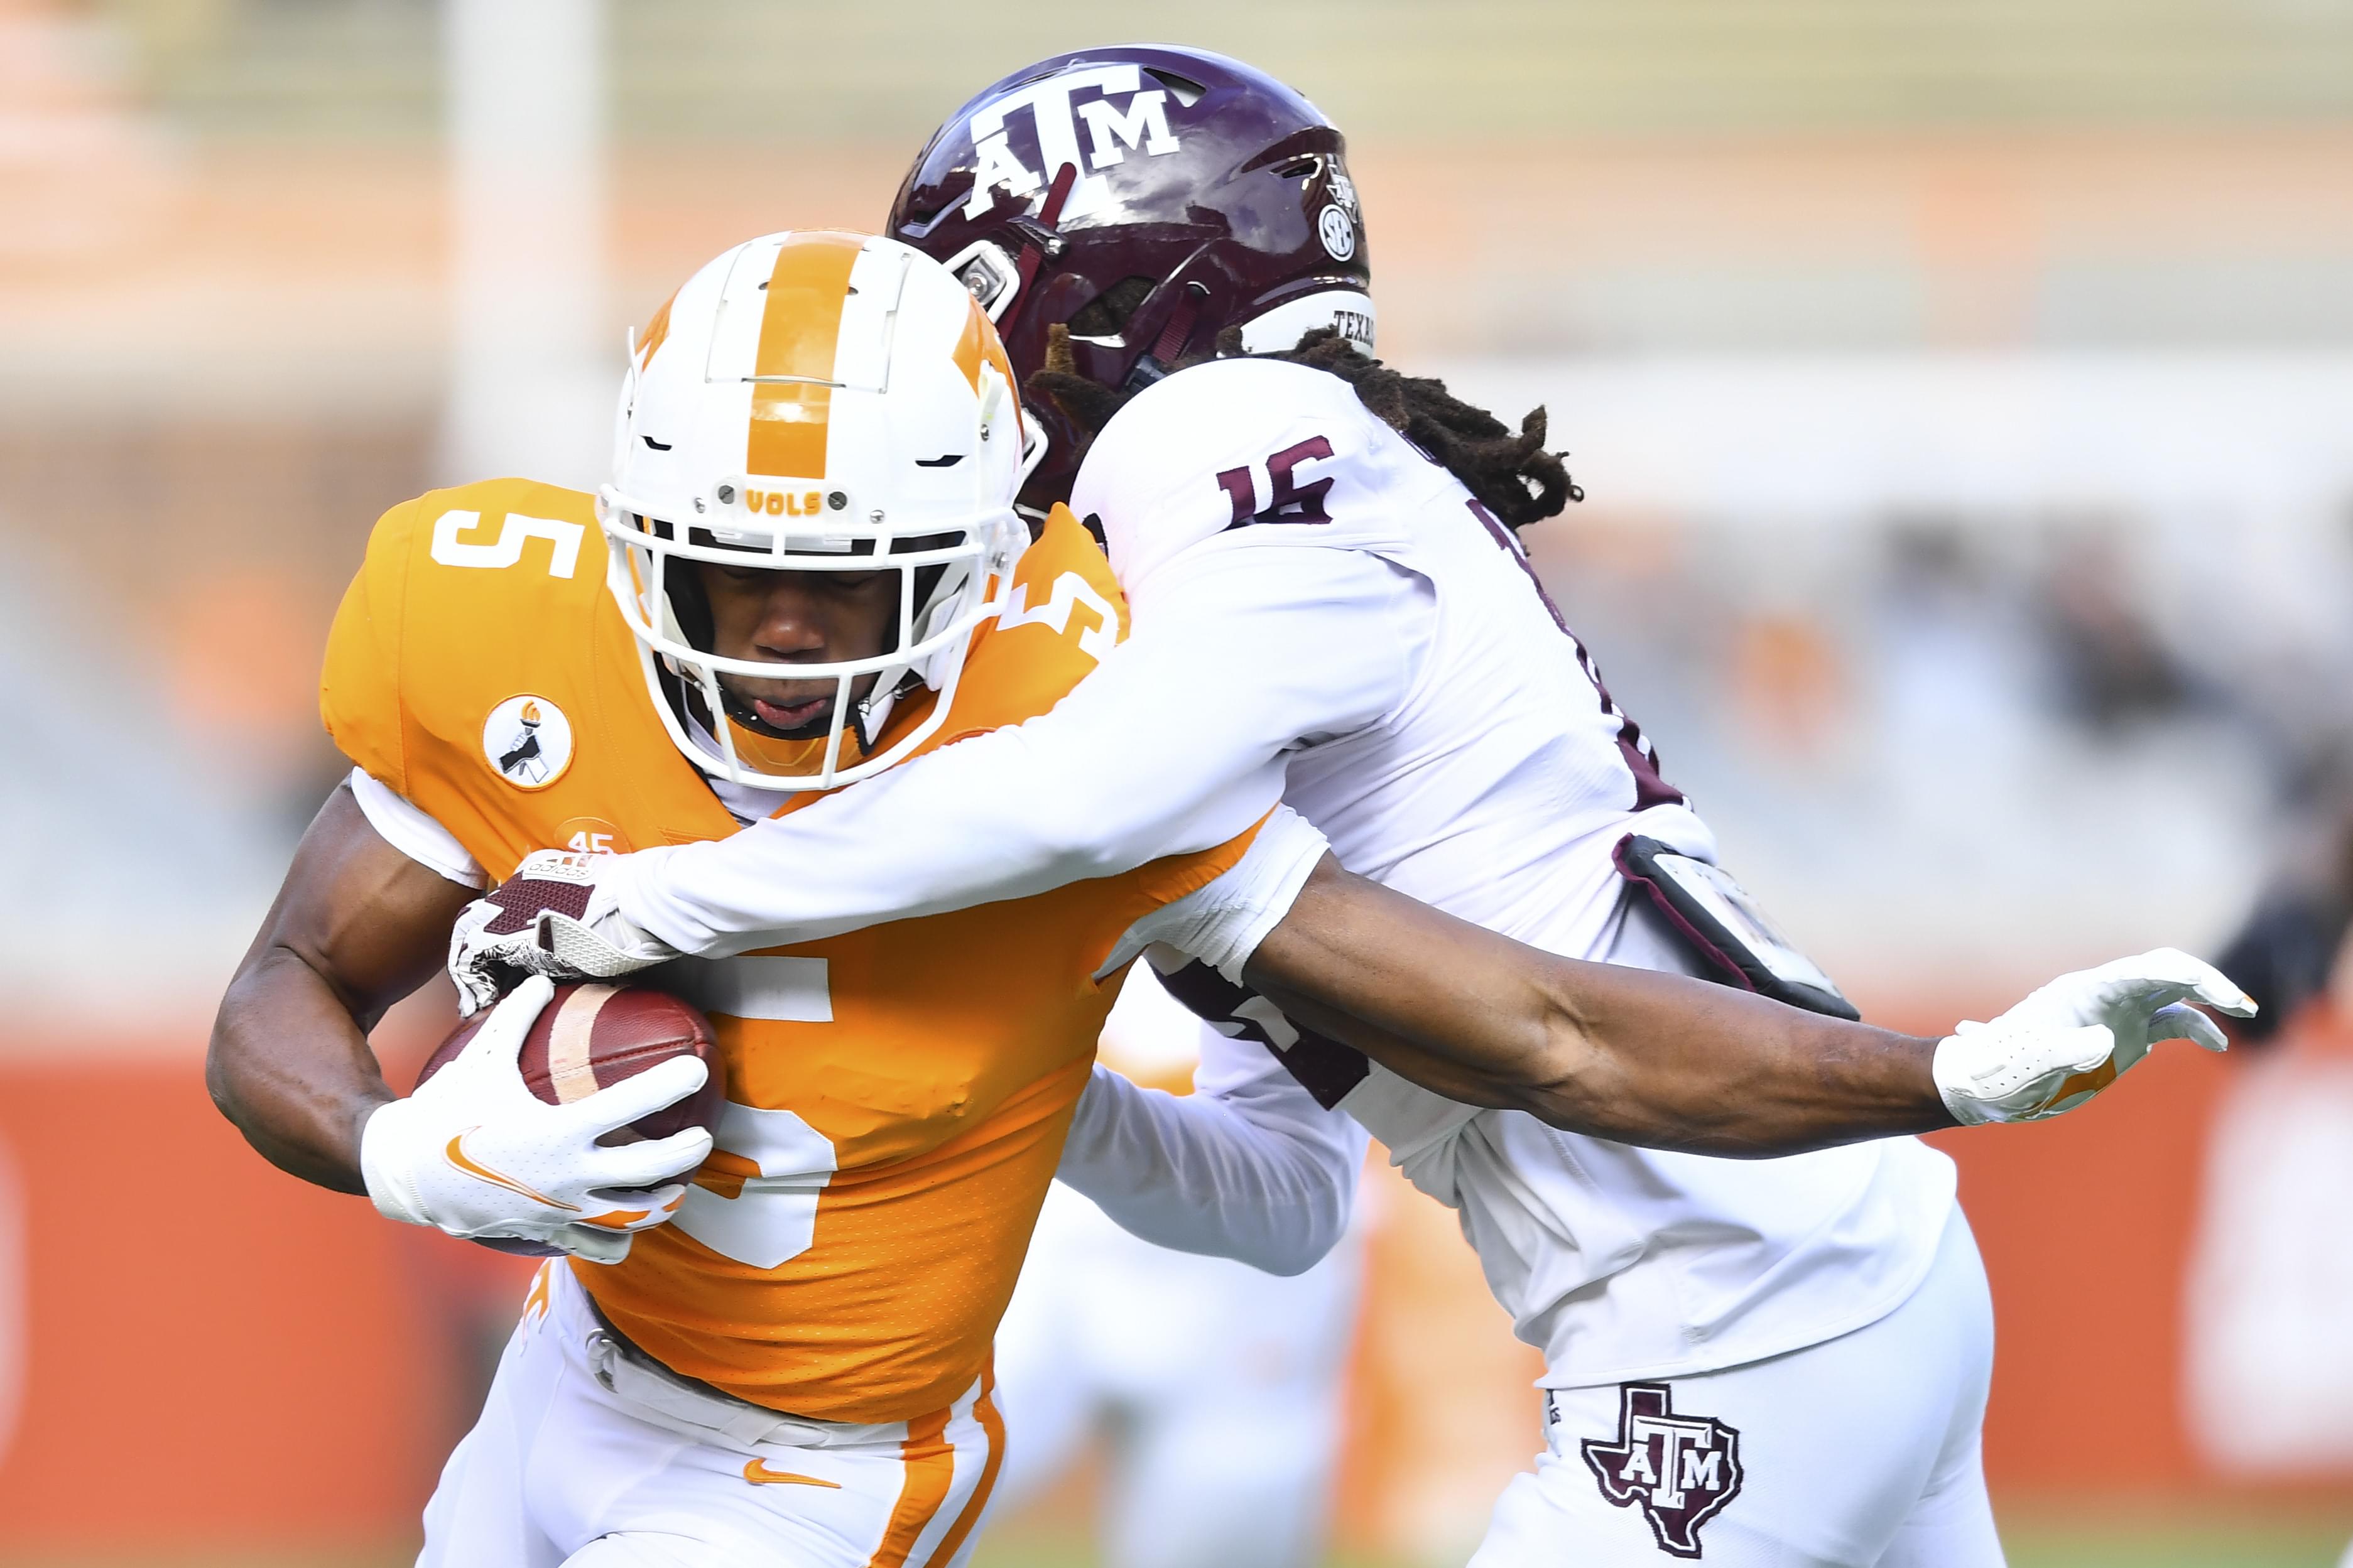 PHOTO GALLERY: Tennessee vs. Texas A&M, seniors and game images